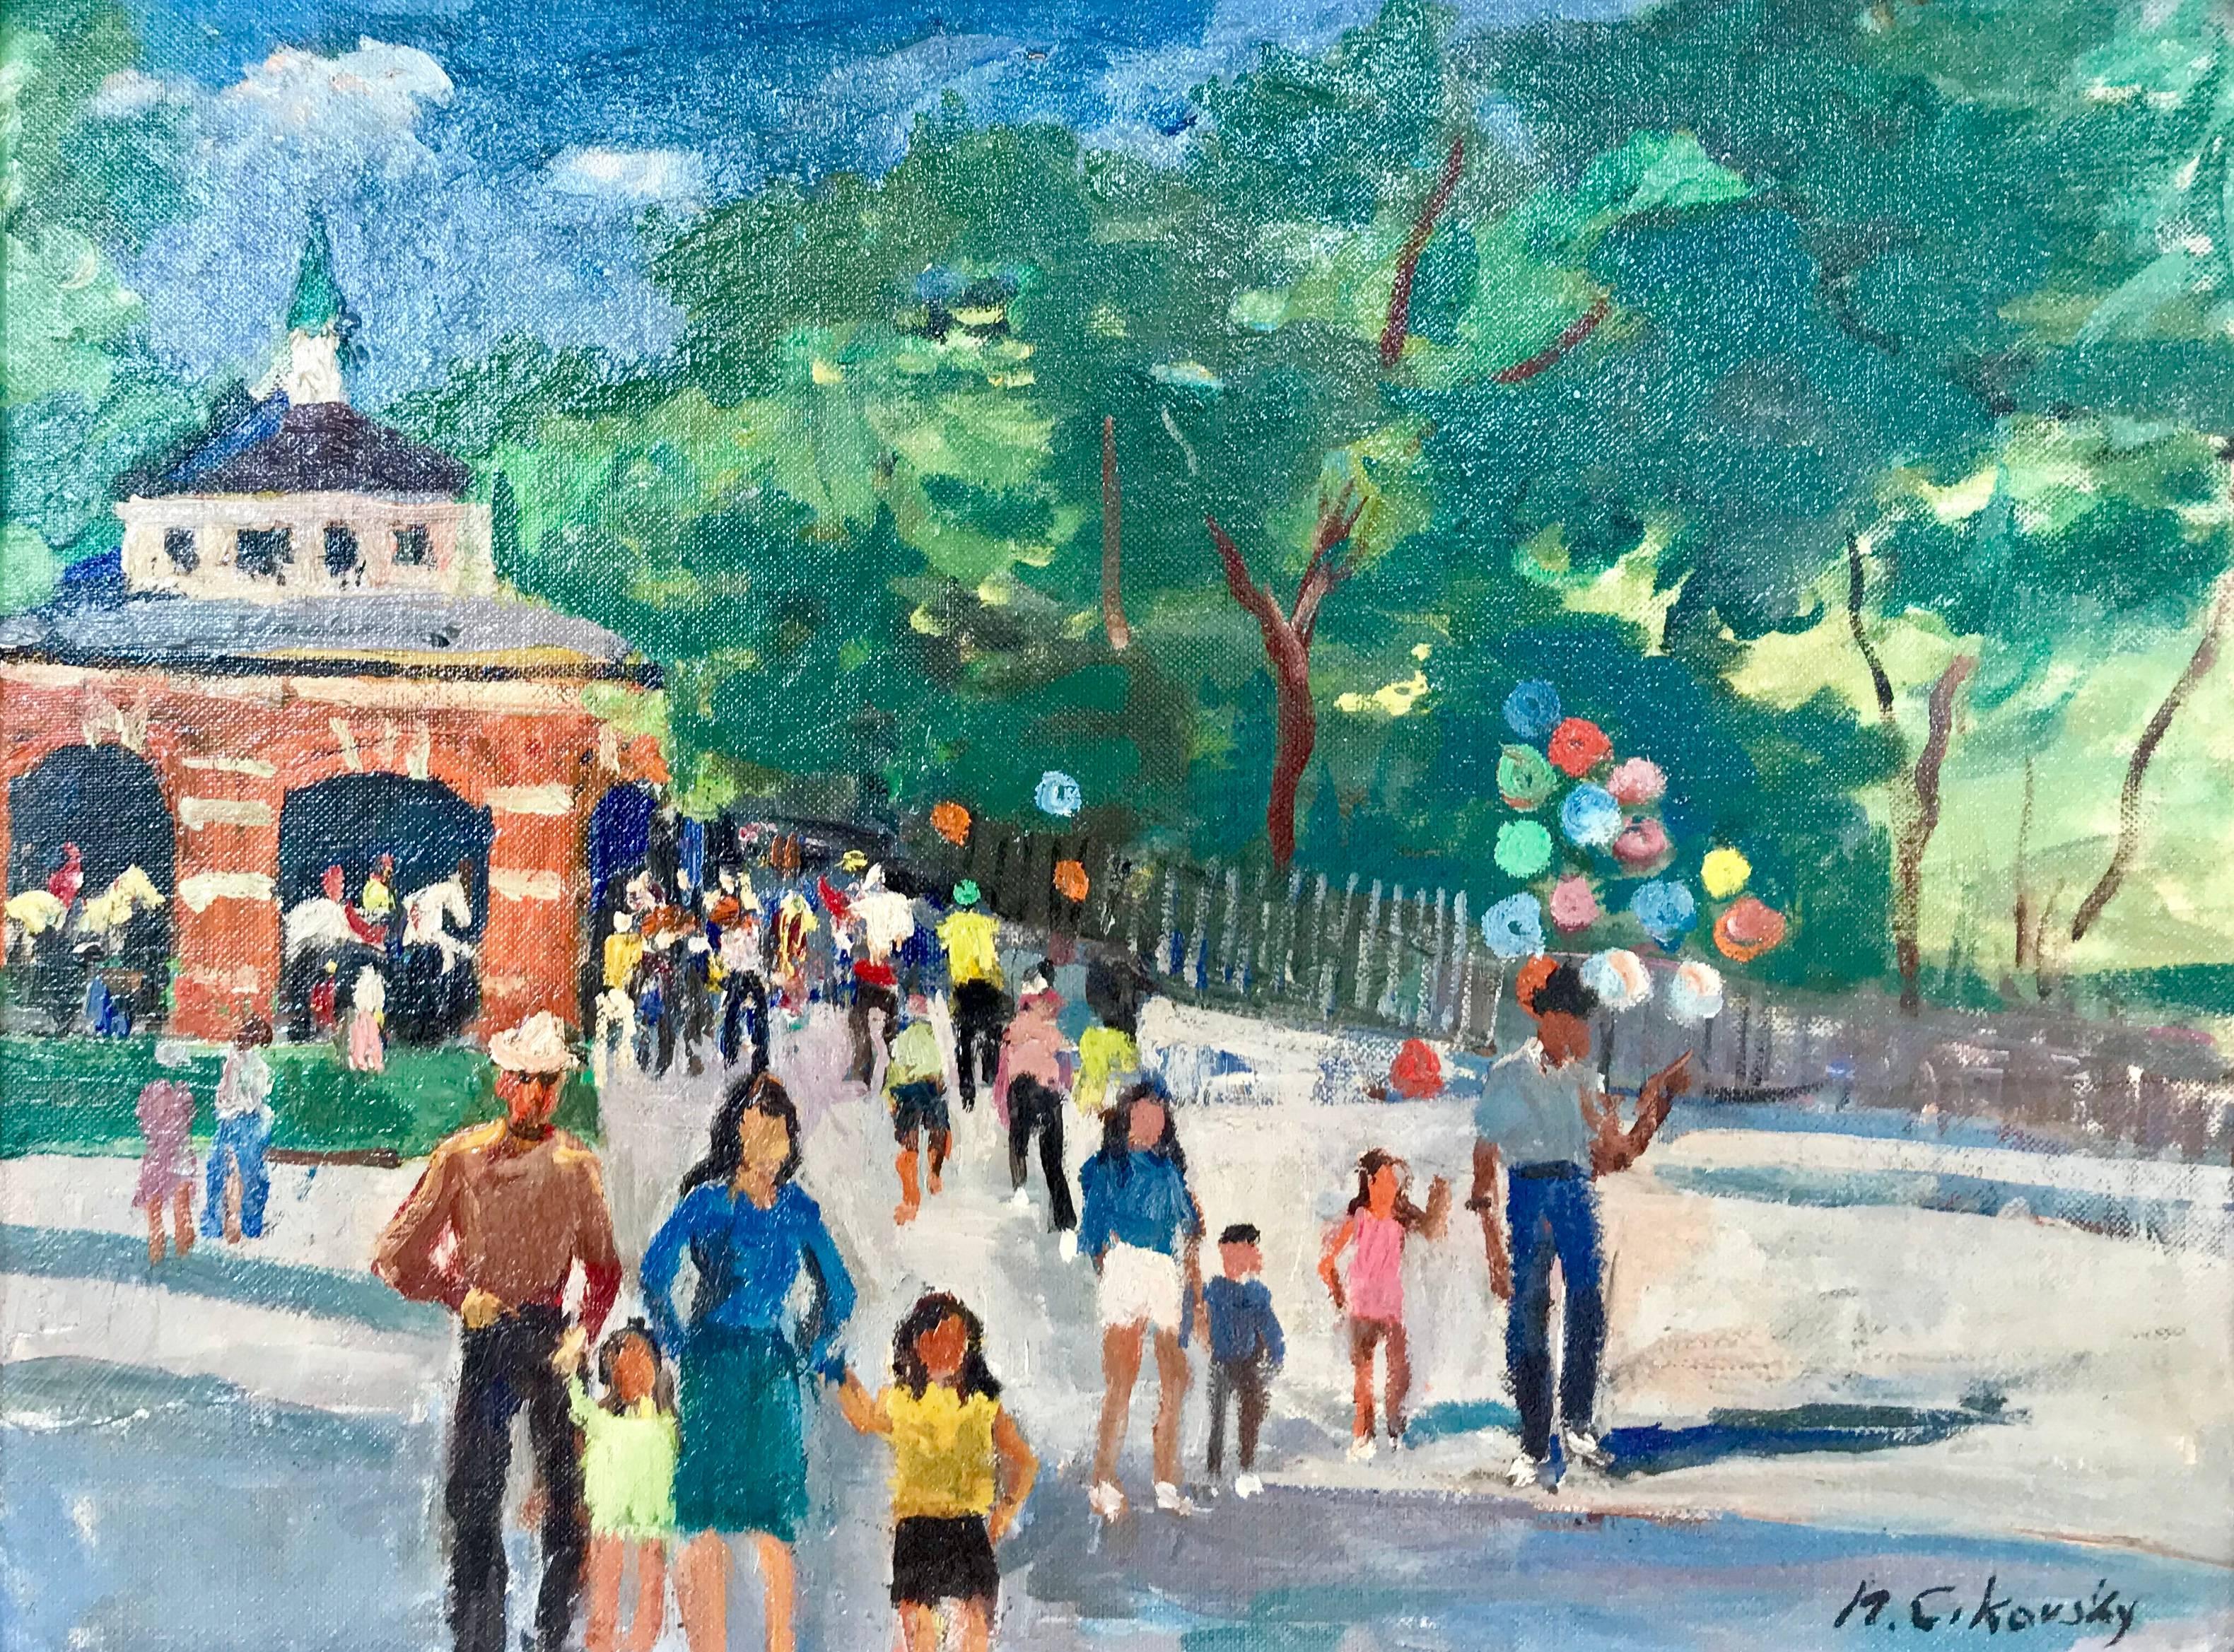 “Carousel in Central Park” - Brown Figurative Painting by Nicolai Cikovsky